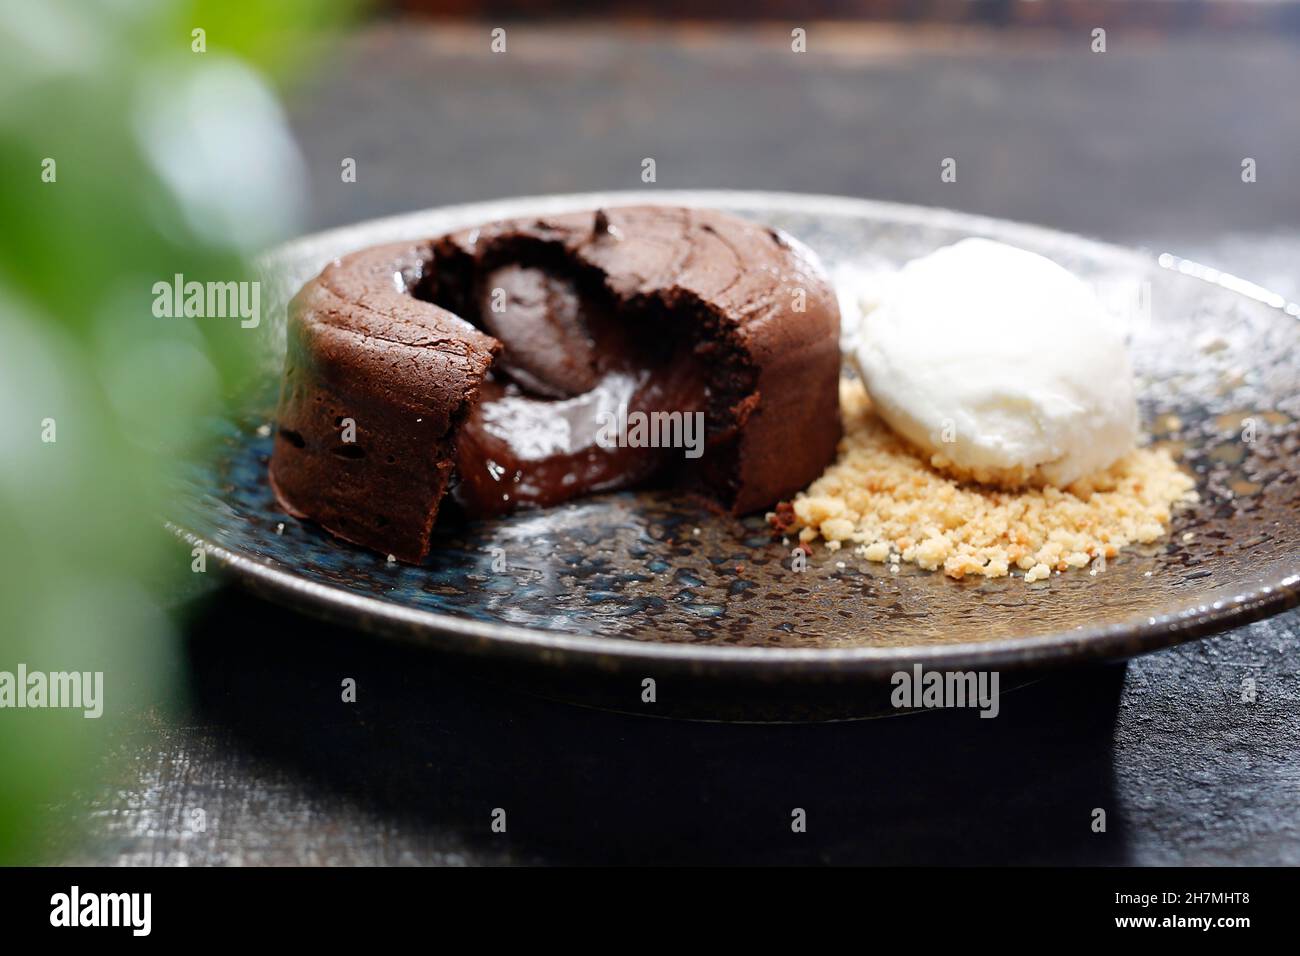 Chocolate cake with ice cream and nuts. Tasty sweet dessert. A tasty dish.Culinary photography. Suggestion to serve the dish. Stock Photo